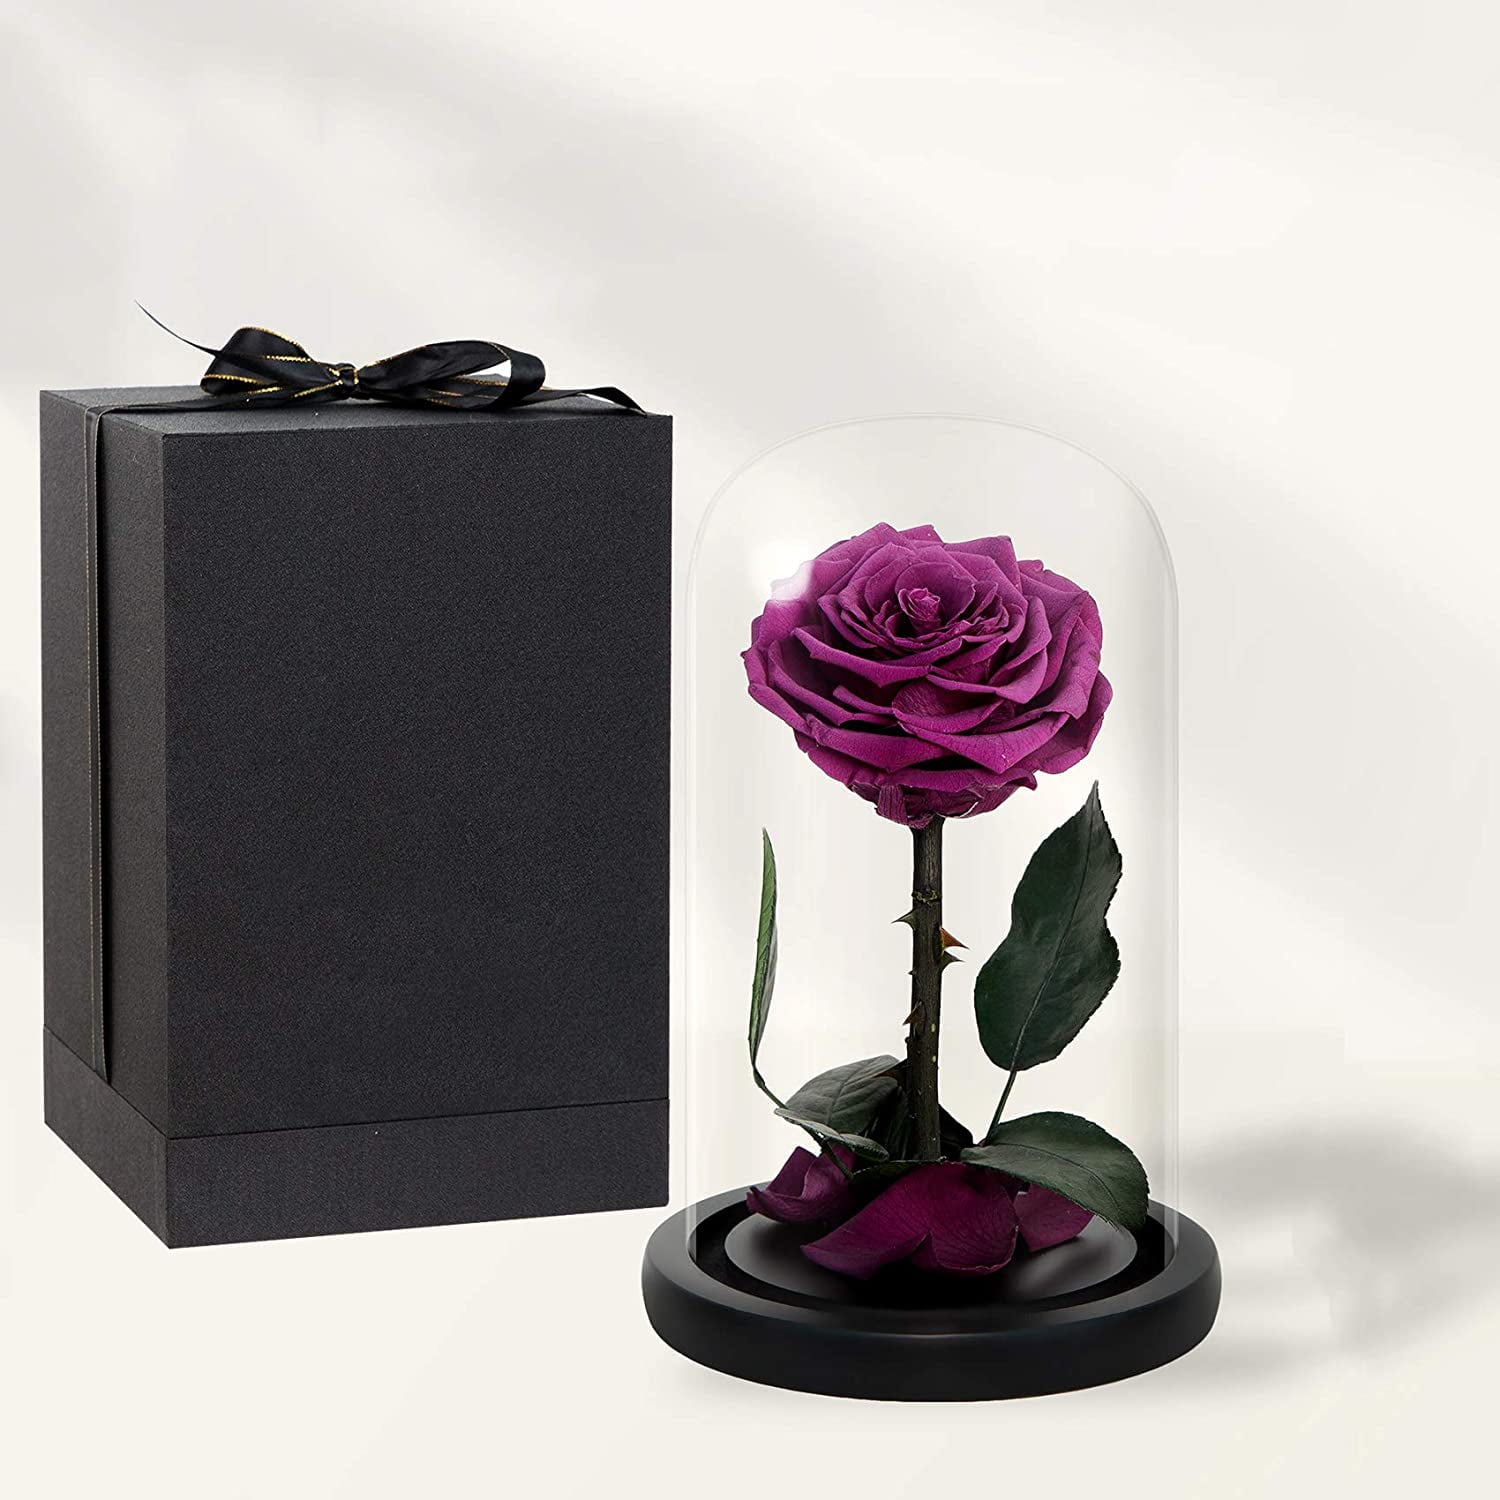 Preserved Roses Red Roses in Glass Dome Rose That Last 2 to 3 Years Red Rose Gifts for Her Three Roses Large Size